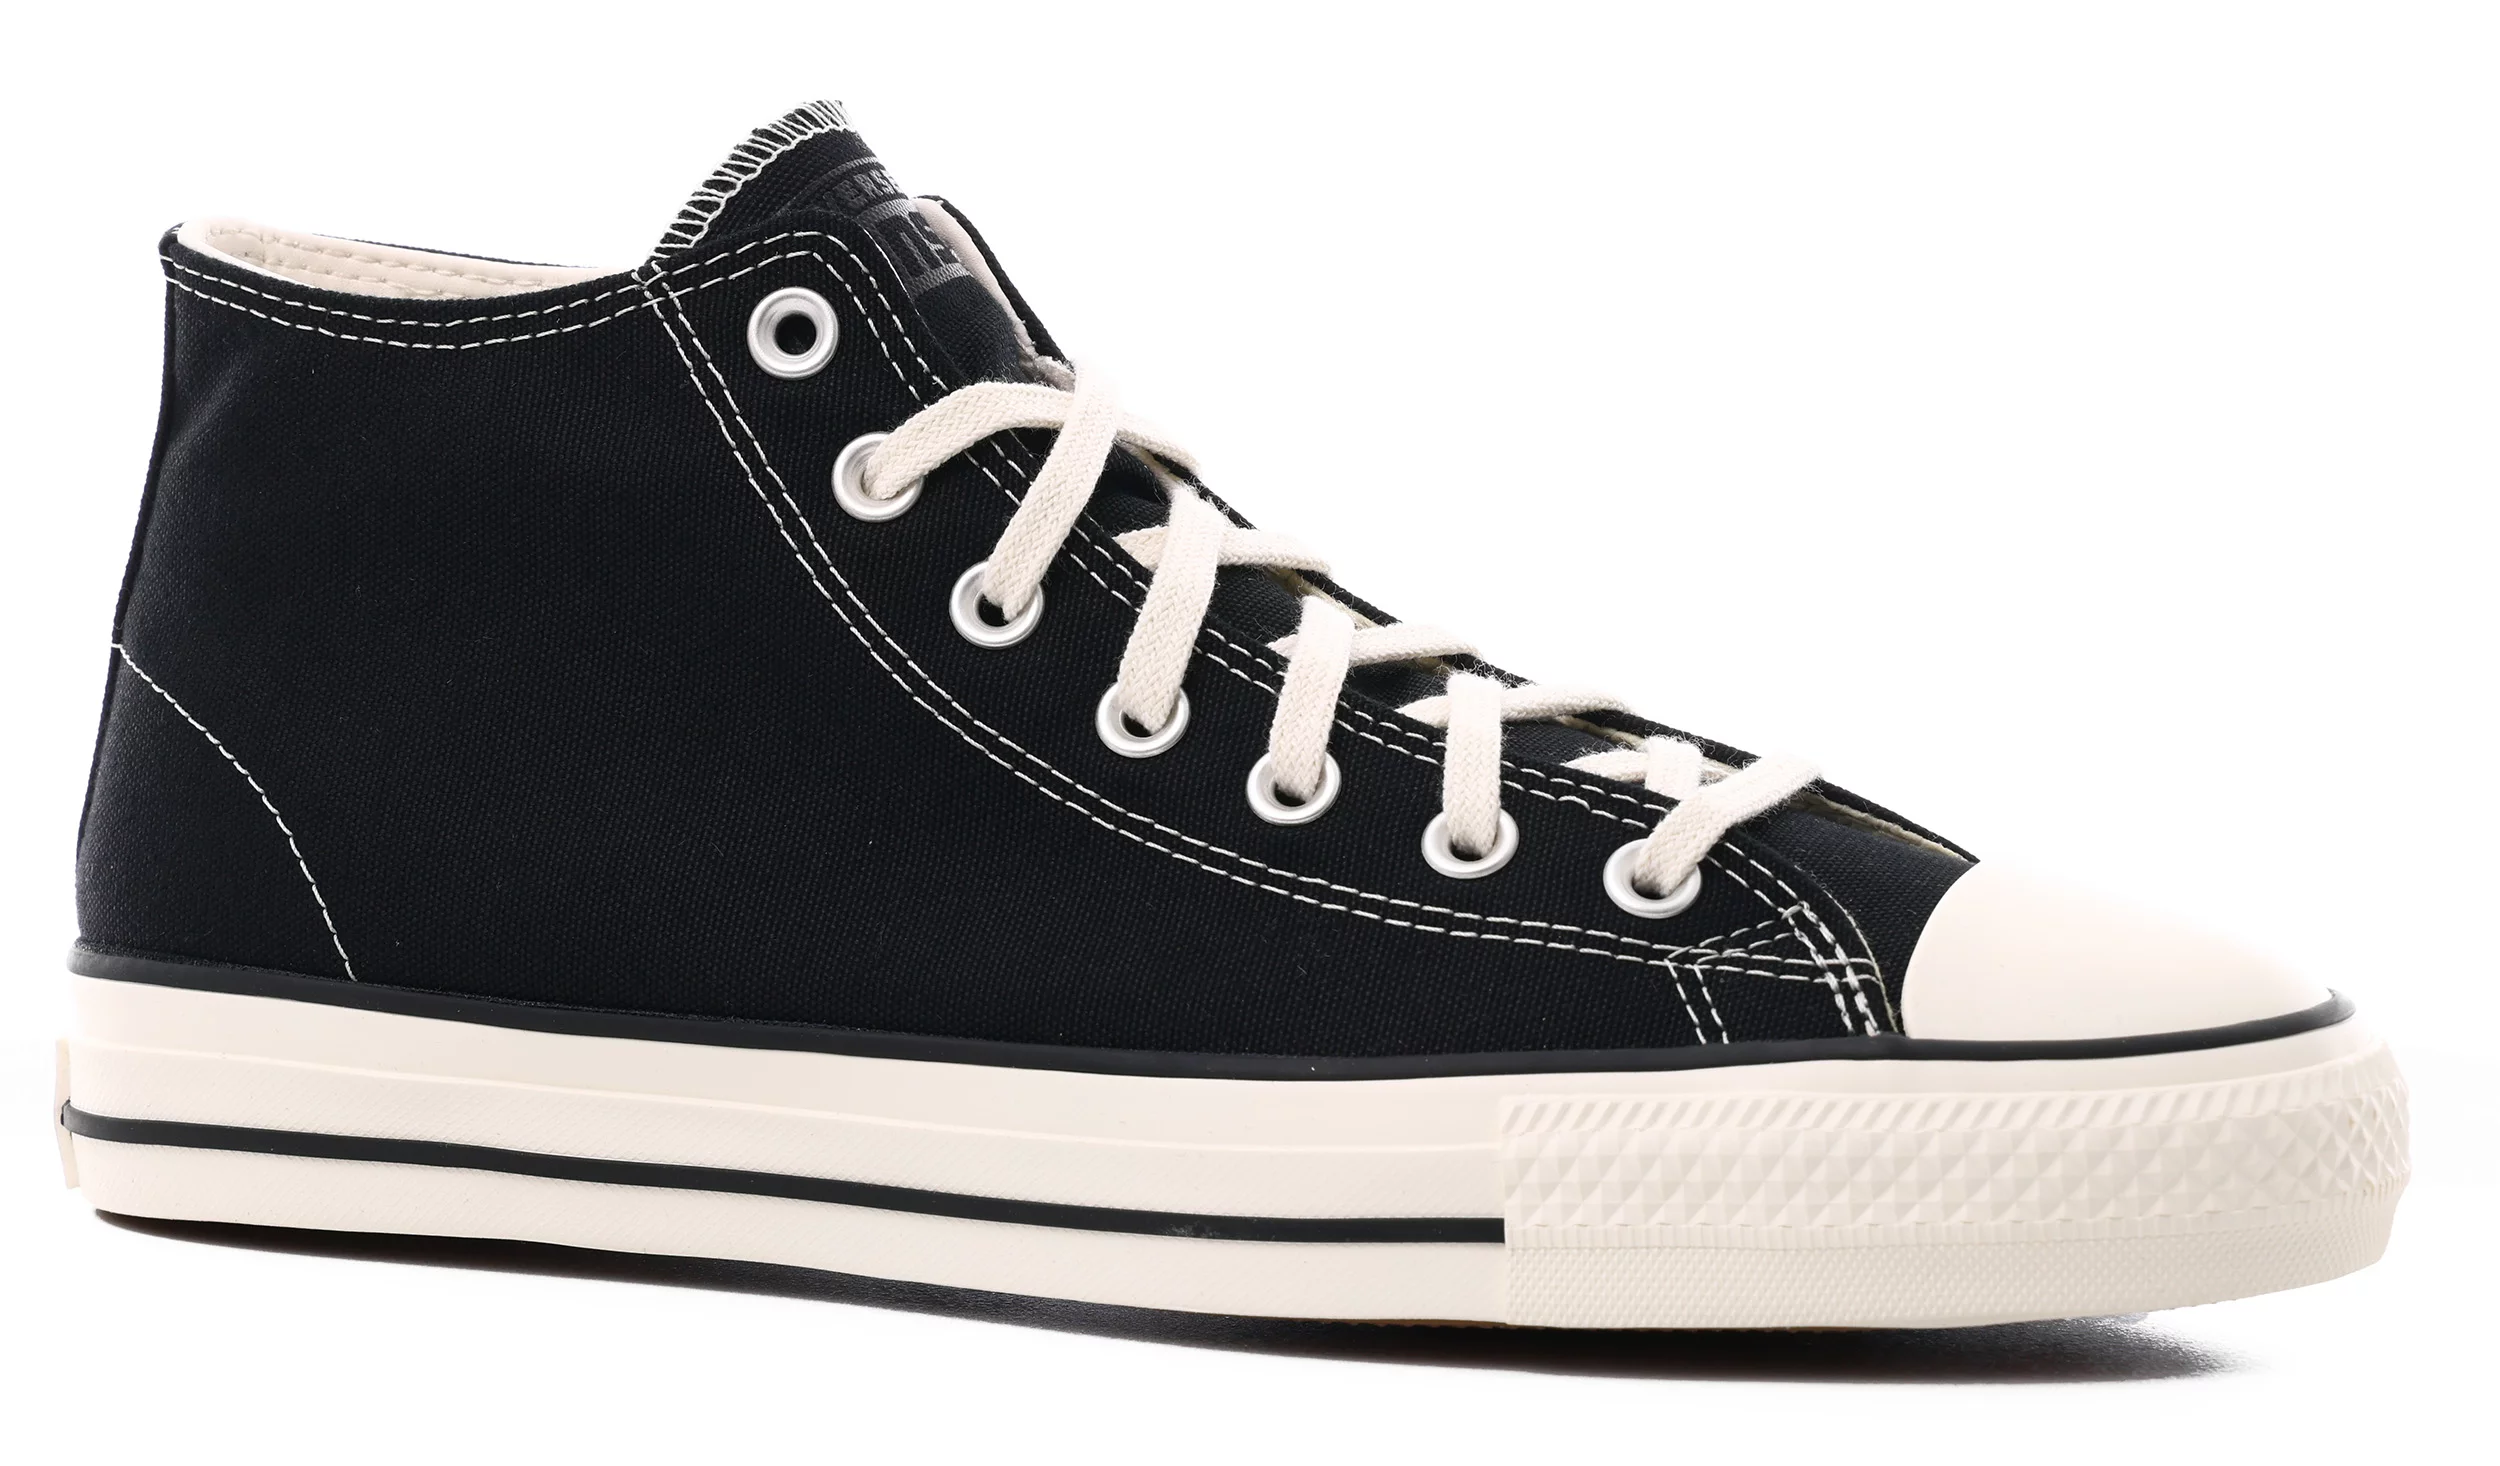 Converse Taylor All Star Pro Mid Skate Shoes black/black/egret - Free Shipping |